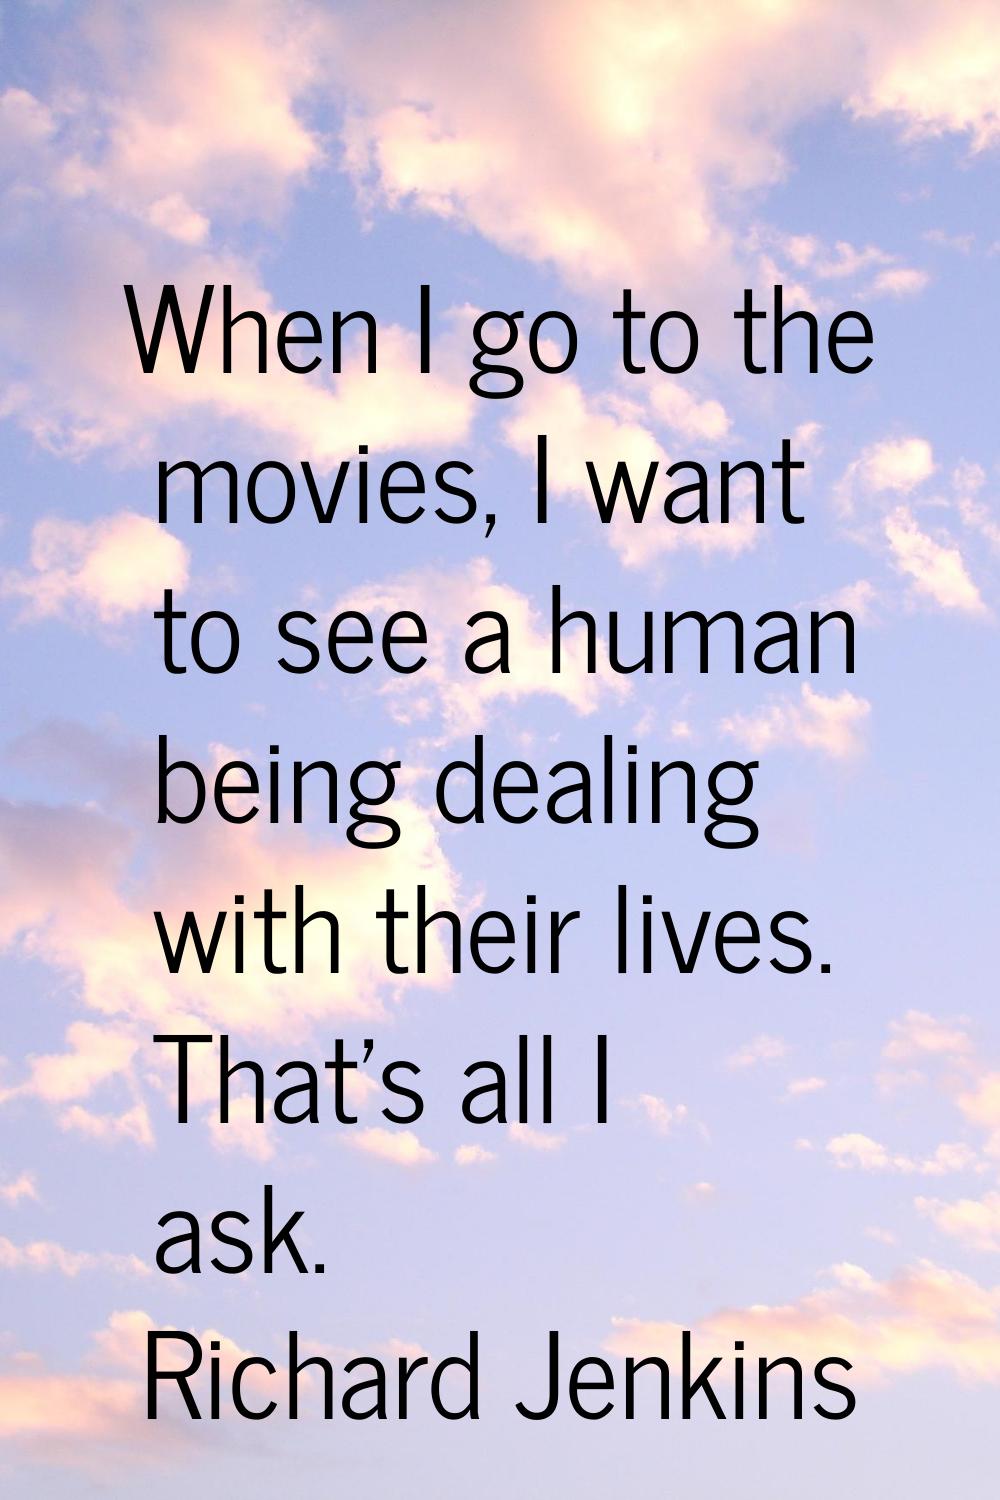 When I go to the movies, I want to see a human being dealing with their lives. That's all I ask.